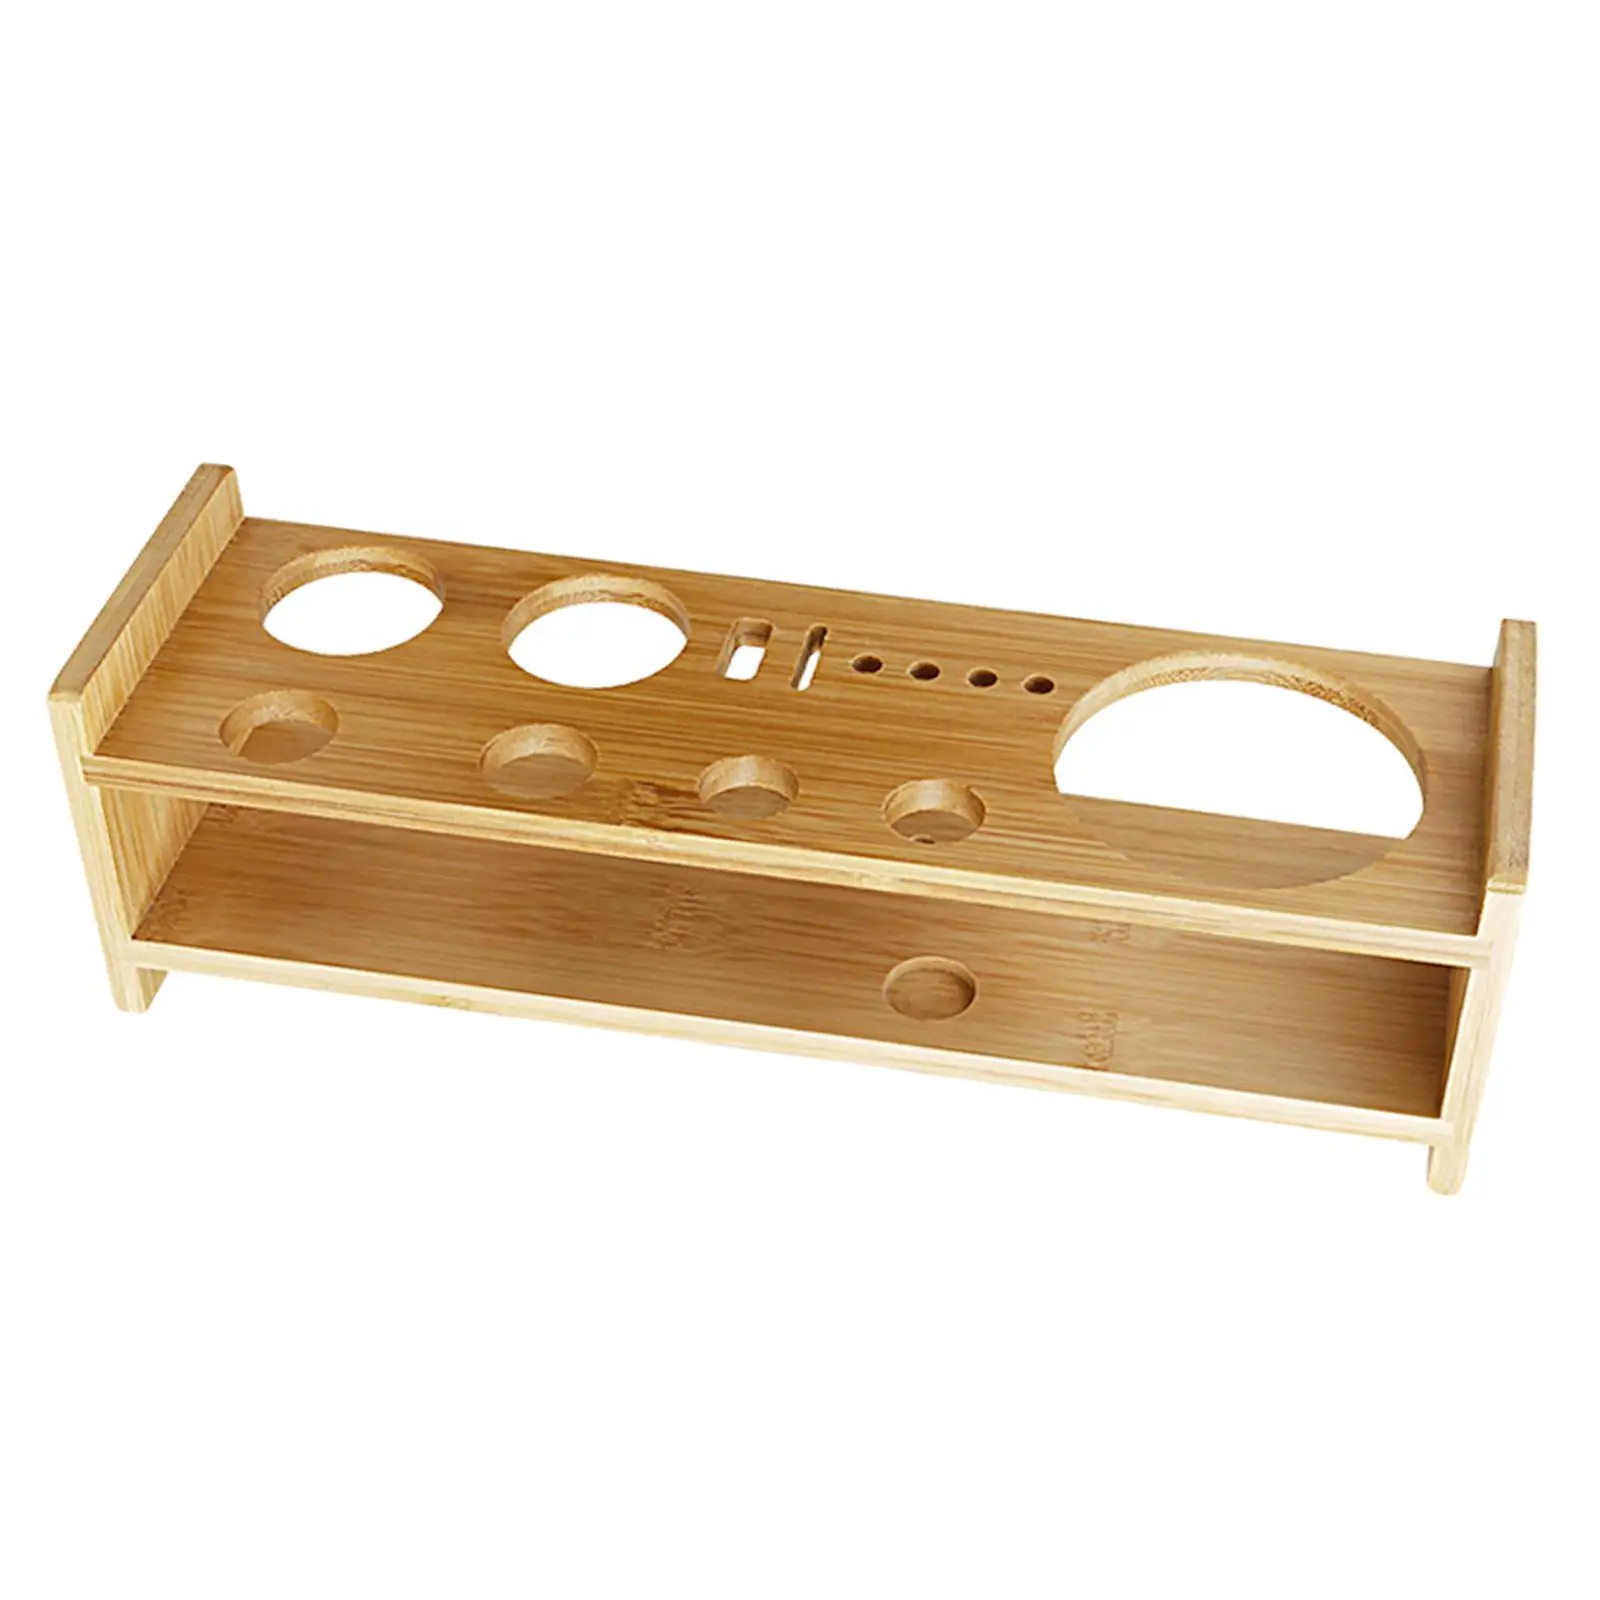 Bartender Kits Bamboo Storage Stand Bar Tool Desktop Bartender Kits Stand Cocktail Shaker Stand for Wedding Party Bar